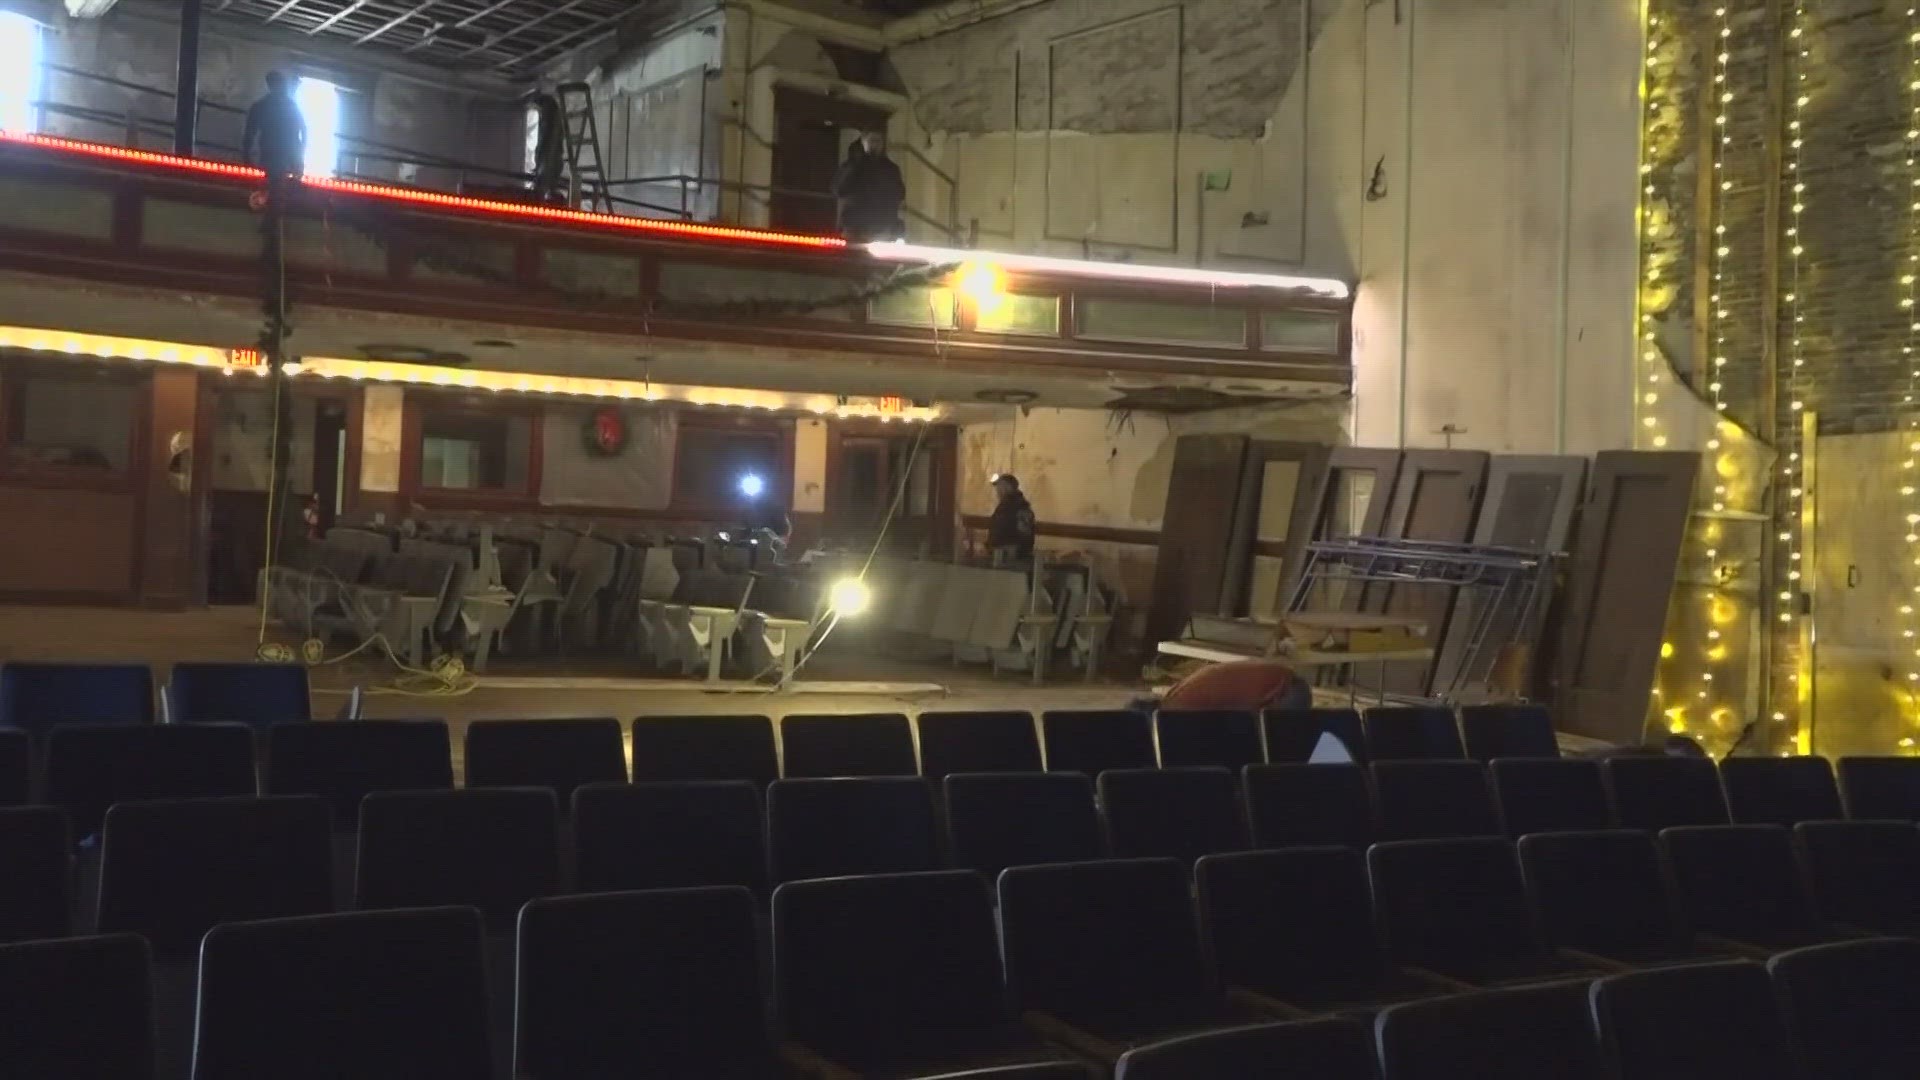 The Colonial Theater in Augusta, which has been closed and vacant since 1969, is getting remodeled with funding secured by Sen. Susan Collins.